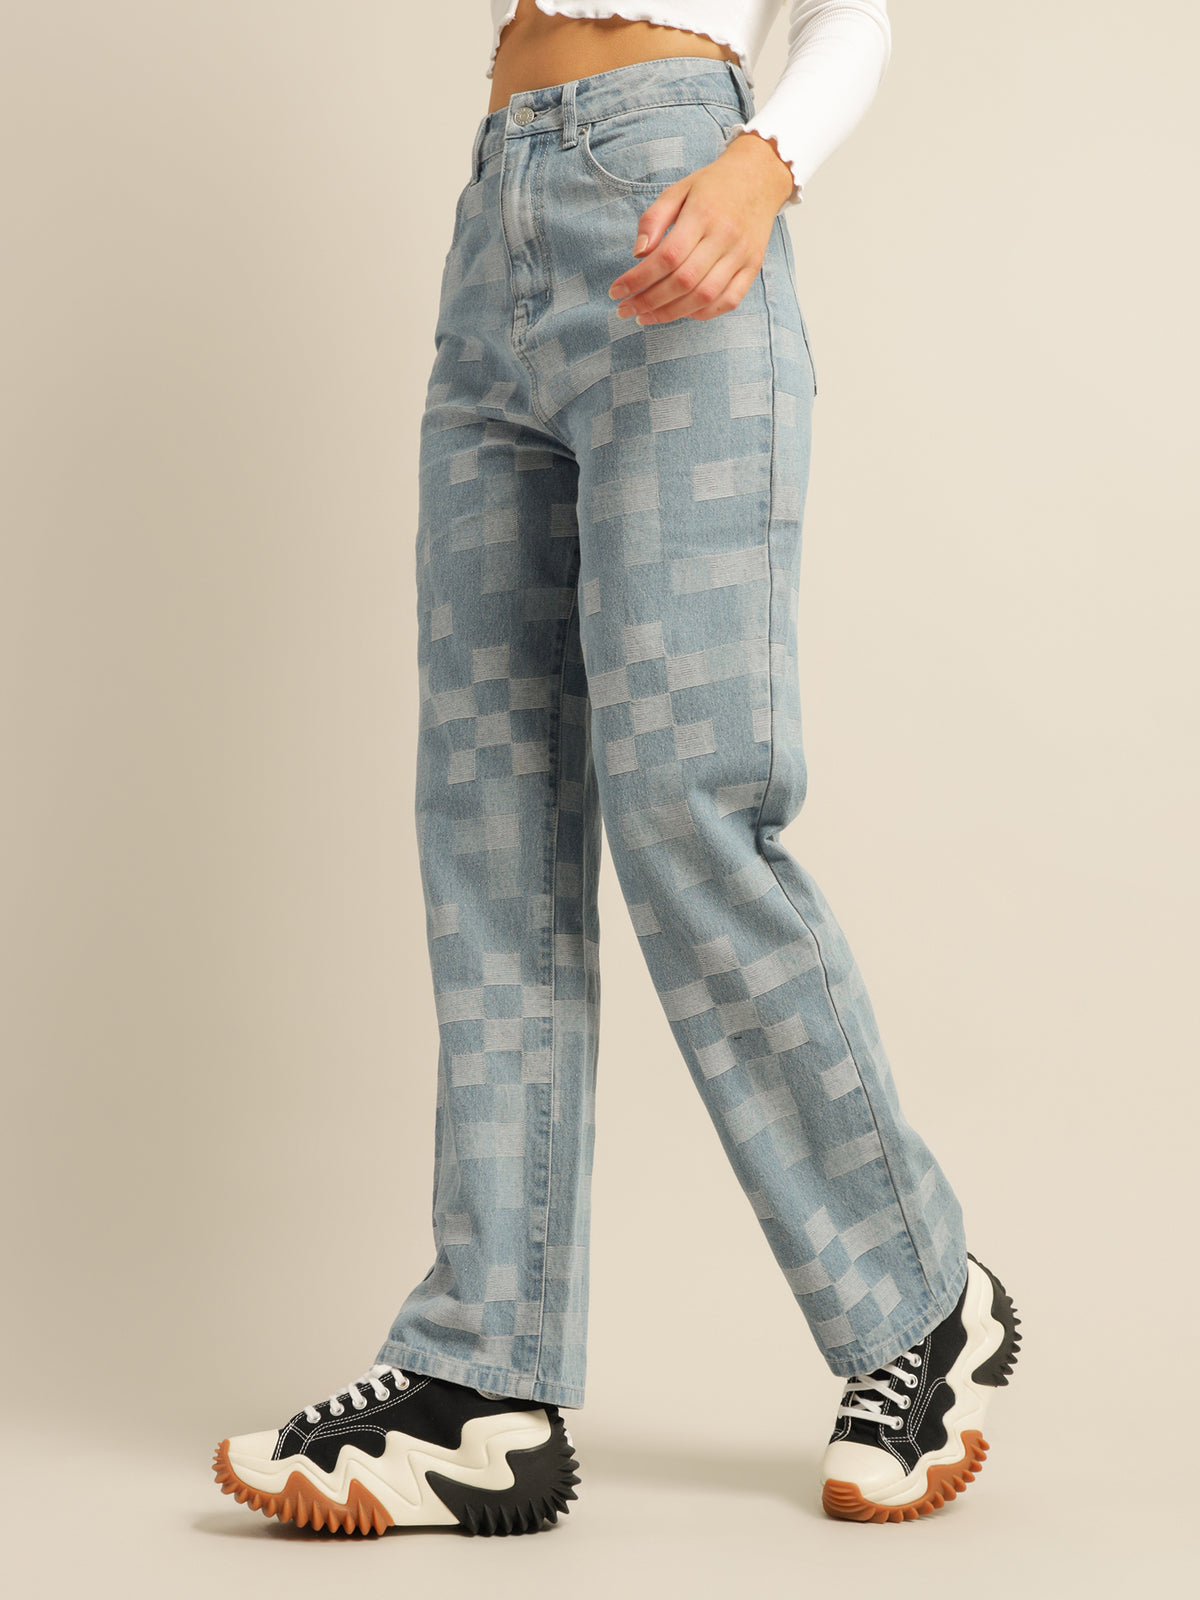 Bri Baggy Jeans in Checkerboard